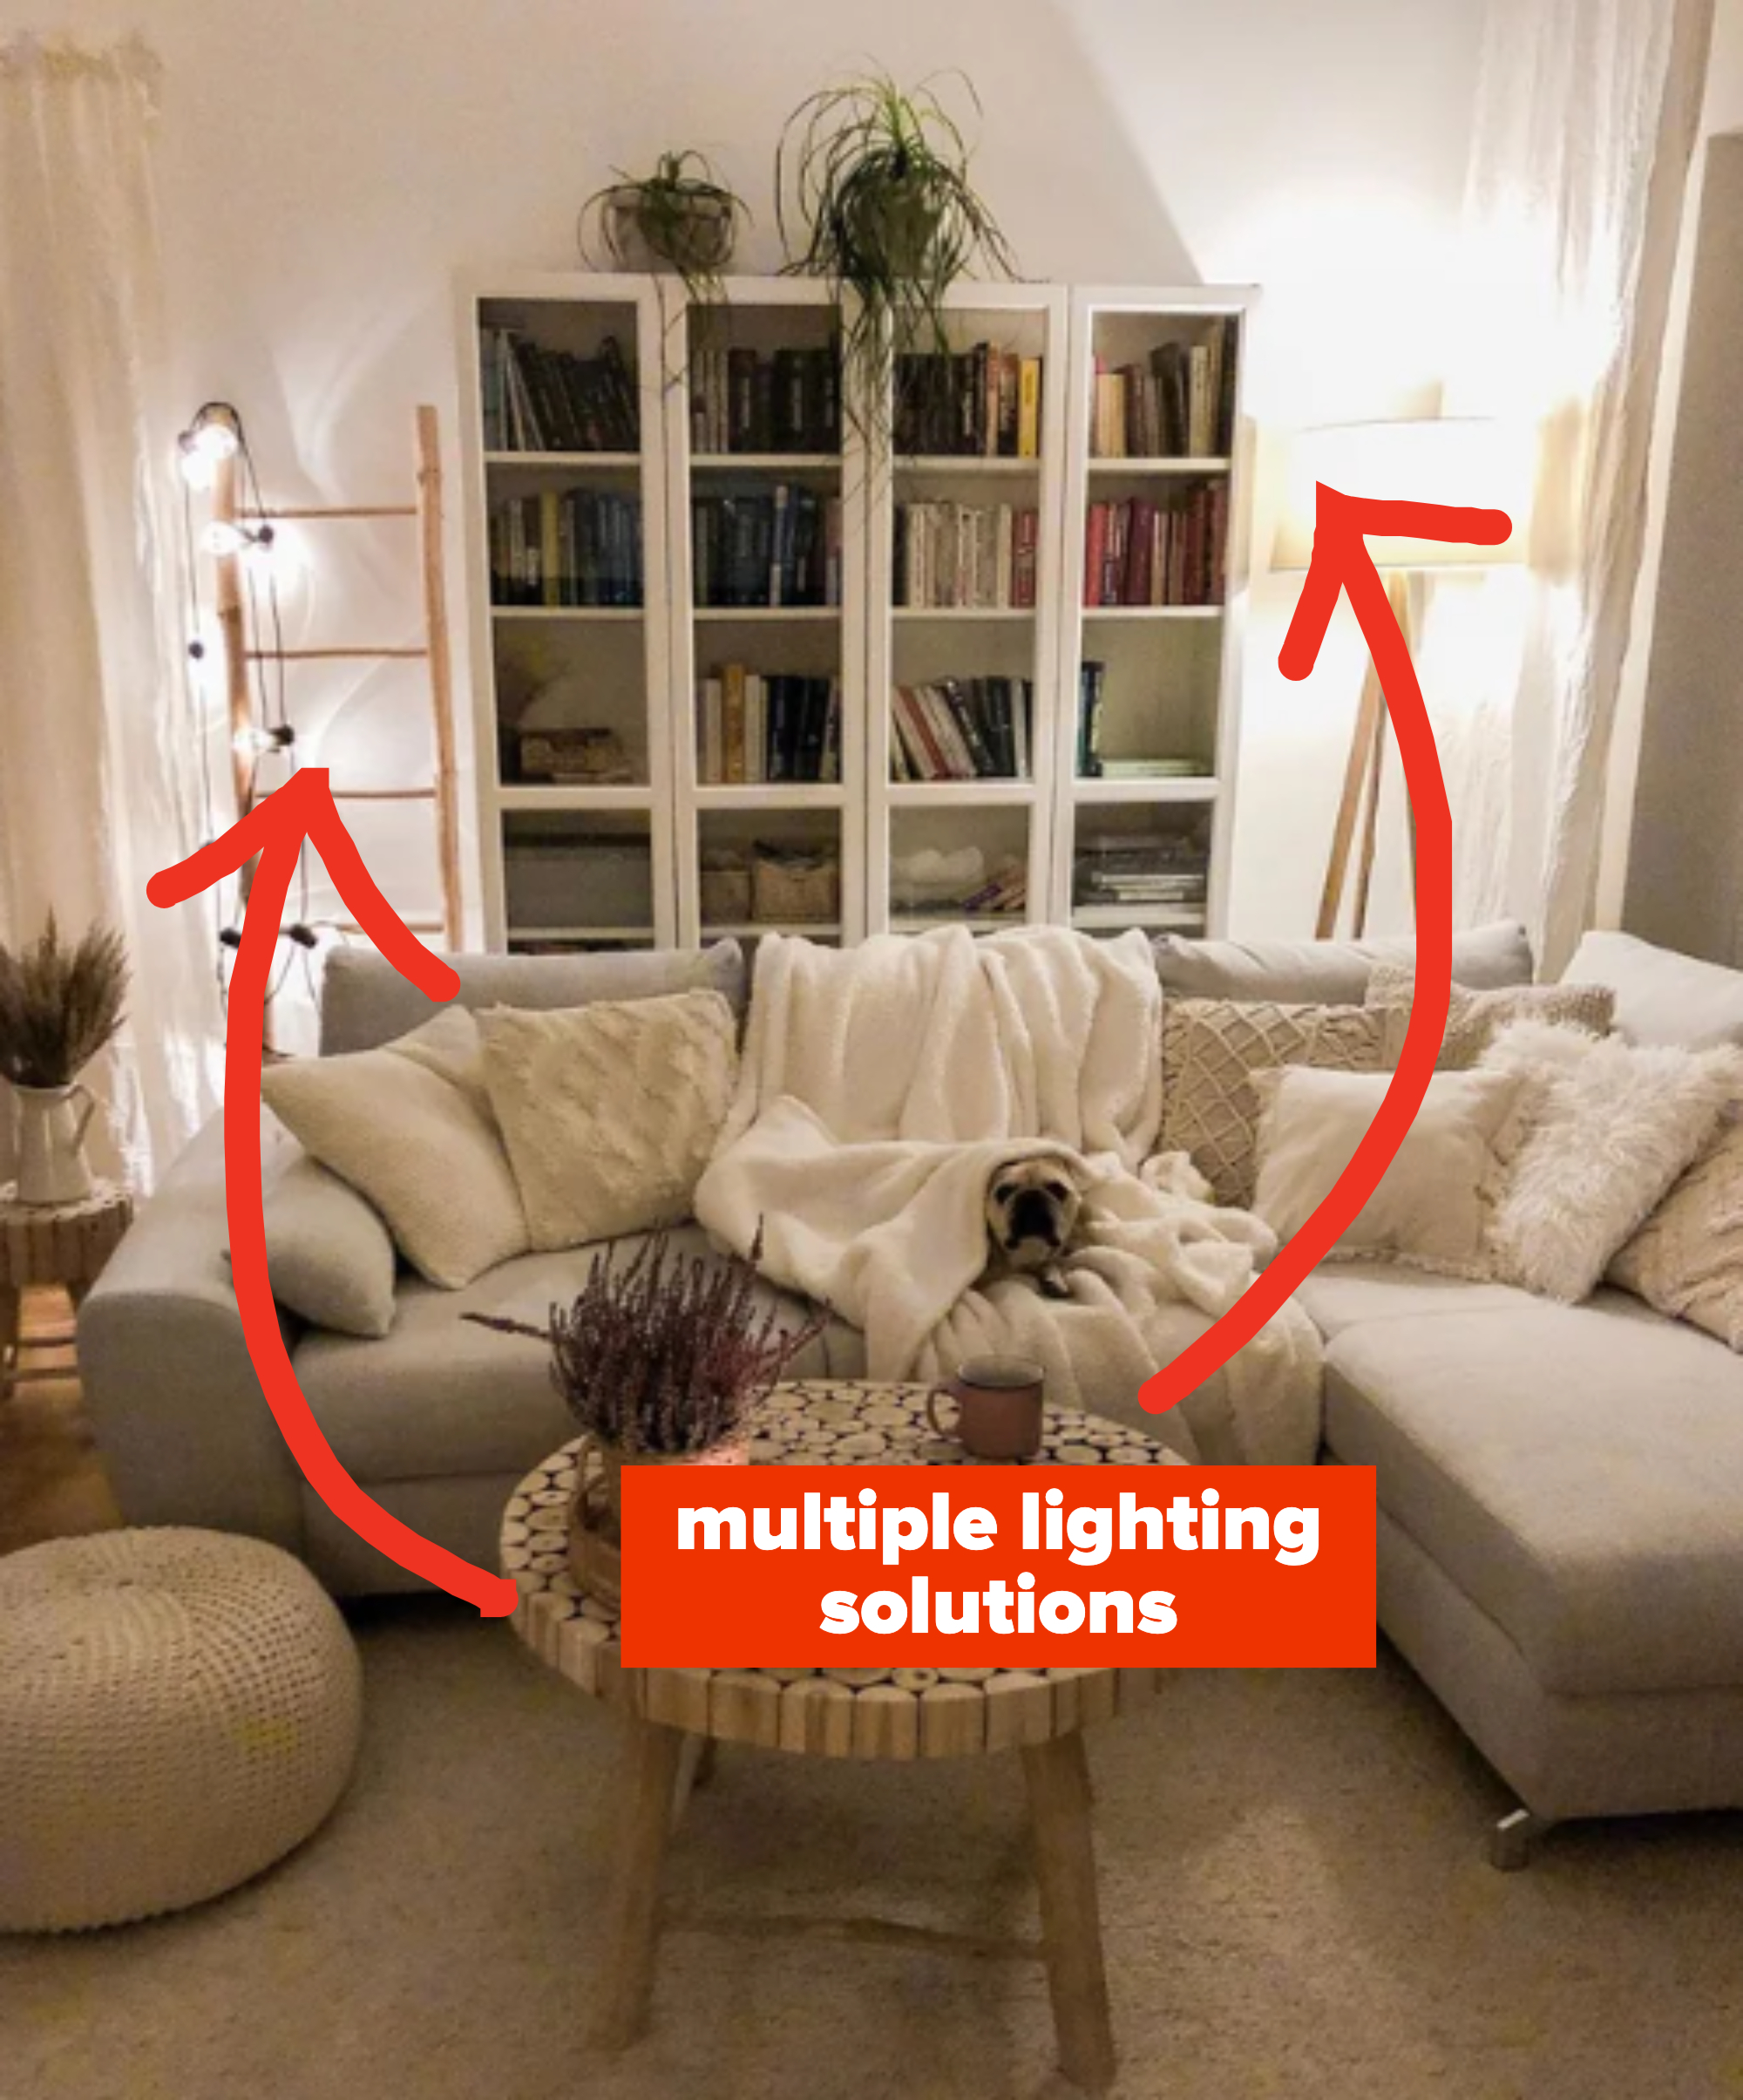 hanging string lights on a wooden ladder and a tripod floor lamp in a living room